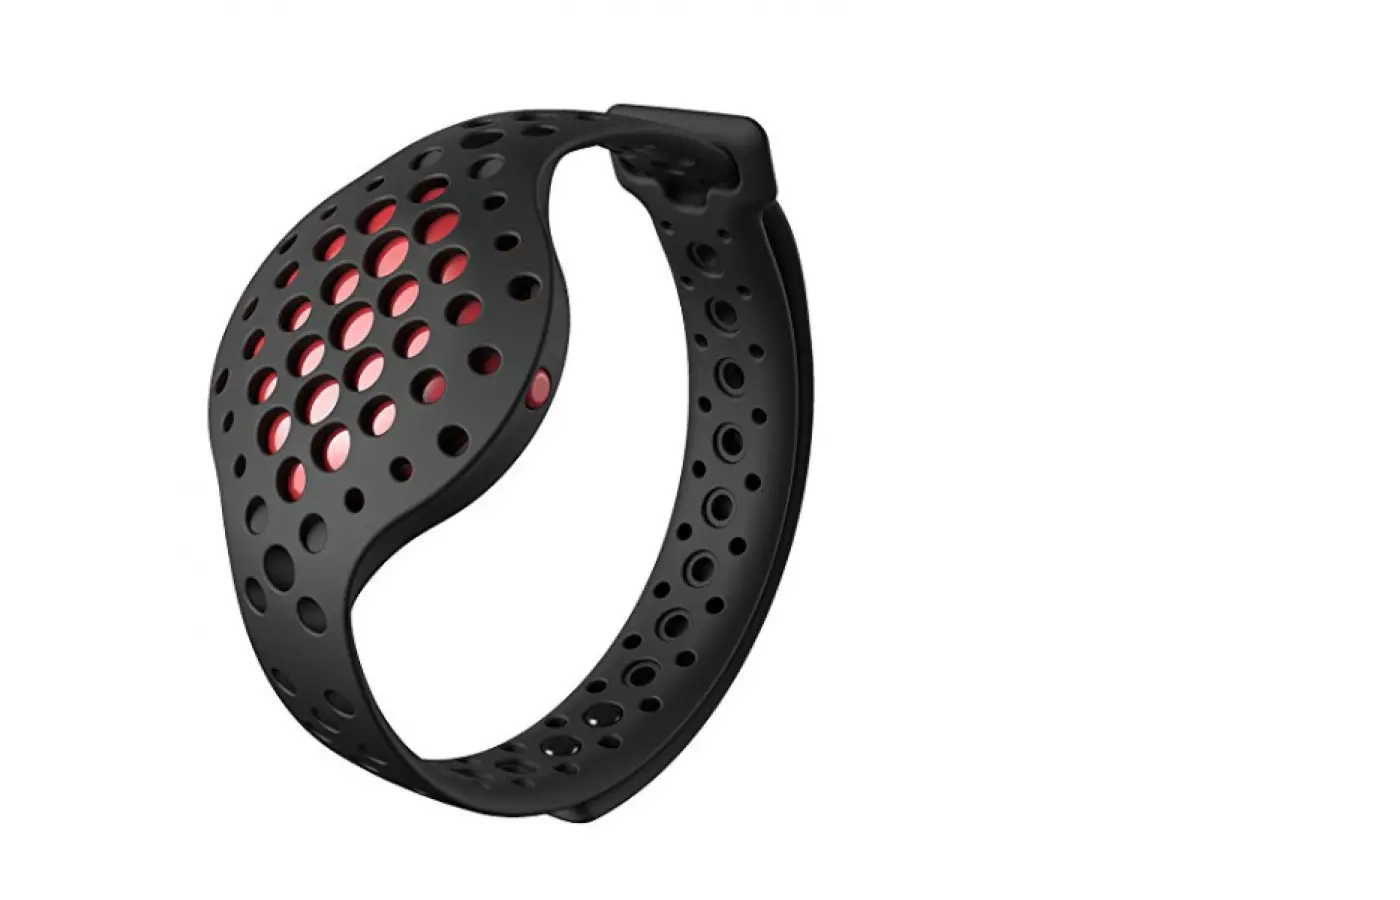 Moov Now is simplicity at its best in a Fitness Tracker.